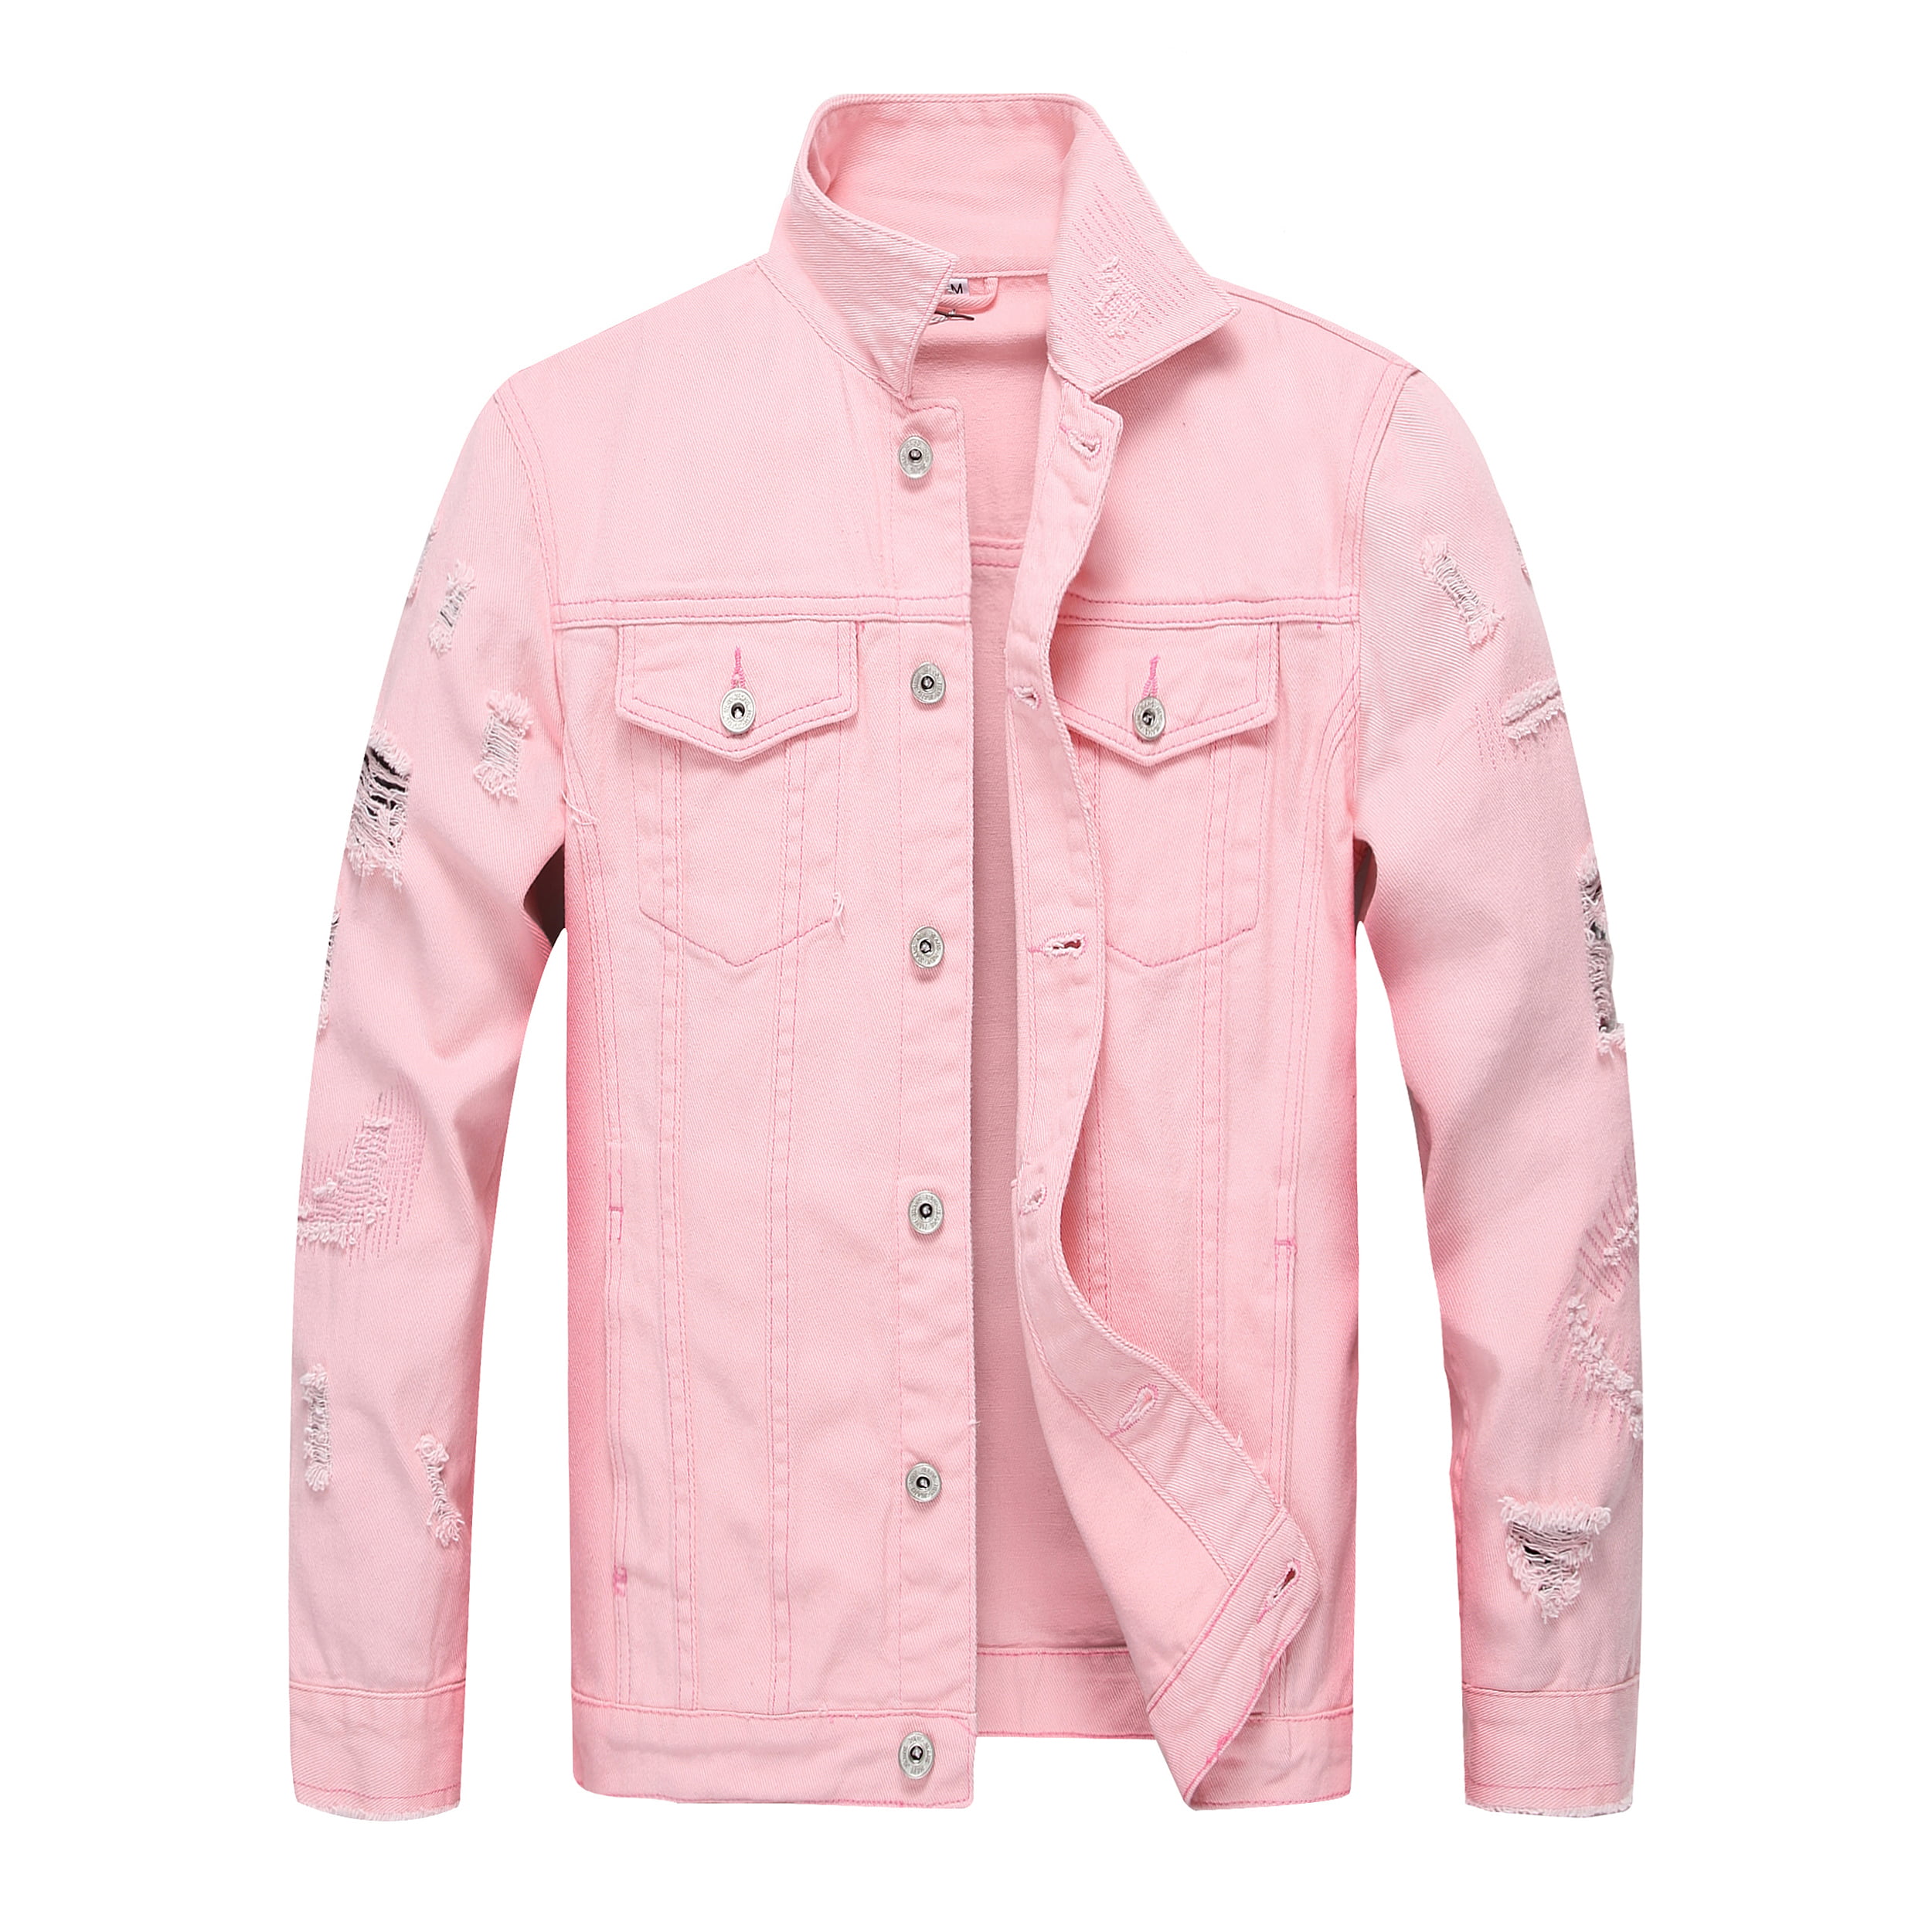 Men Classic Ripped Denim Jacket, Slim Pink Jean Jacket with Holes for ...